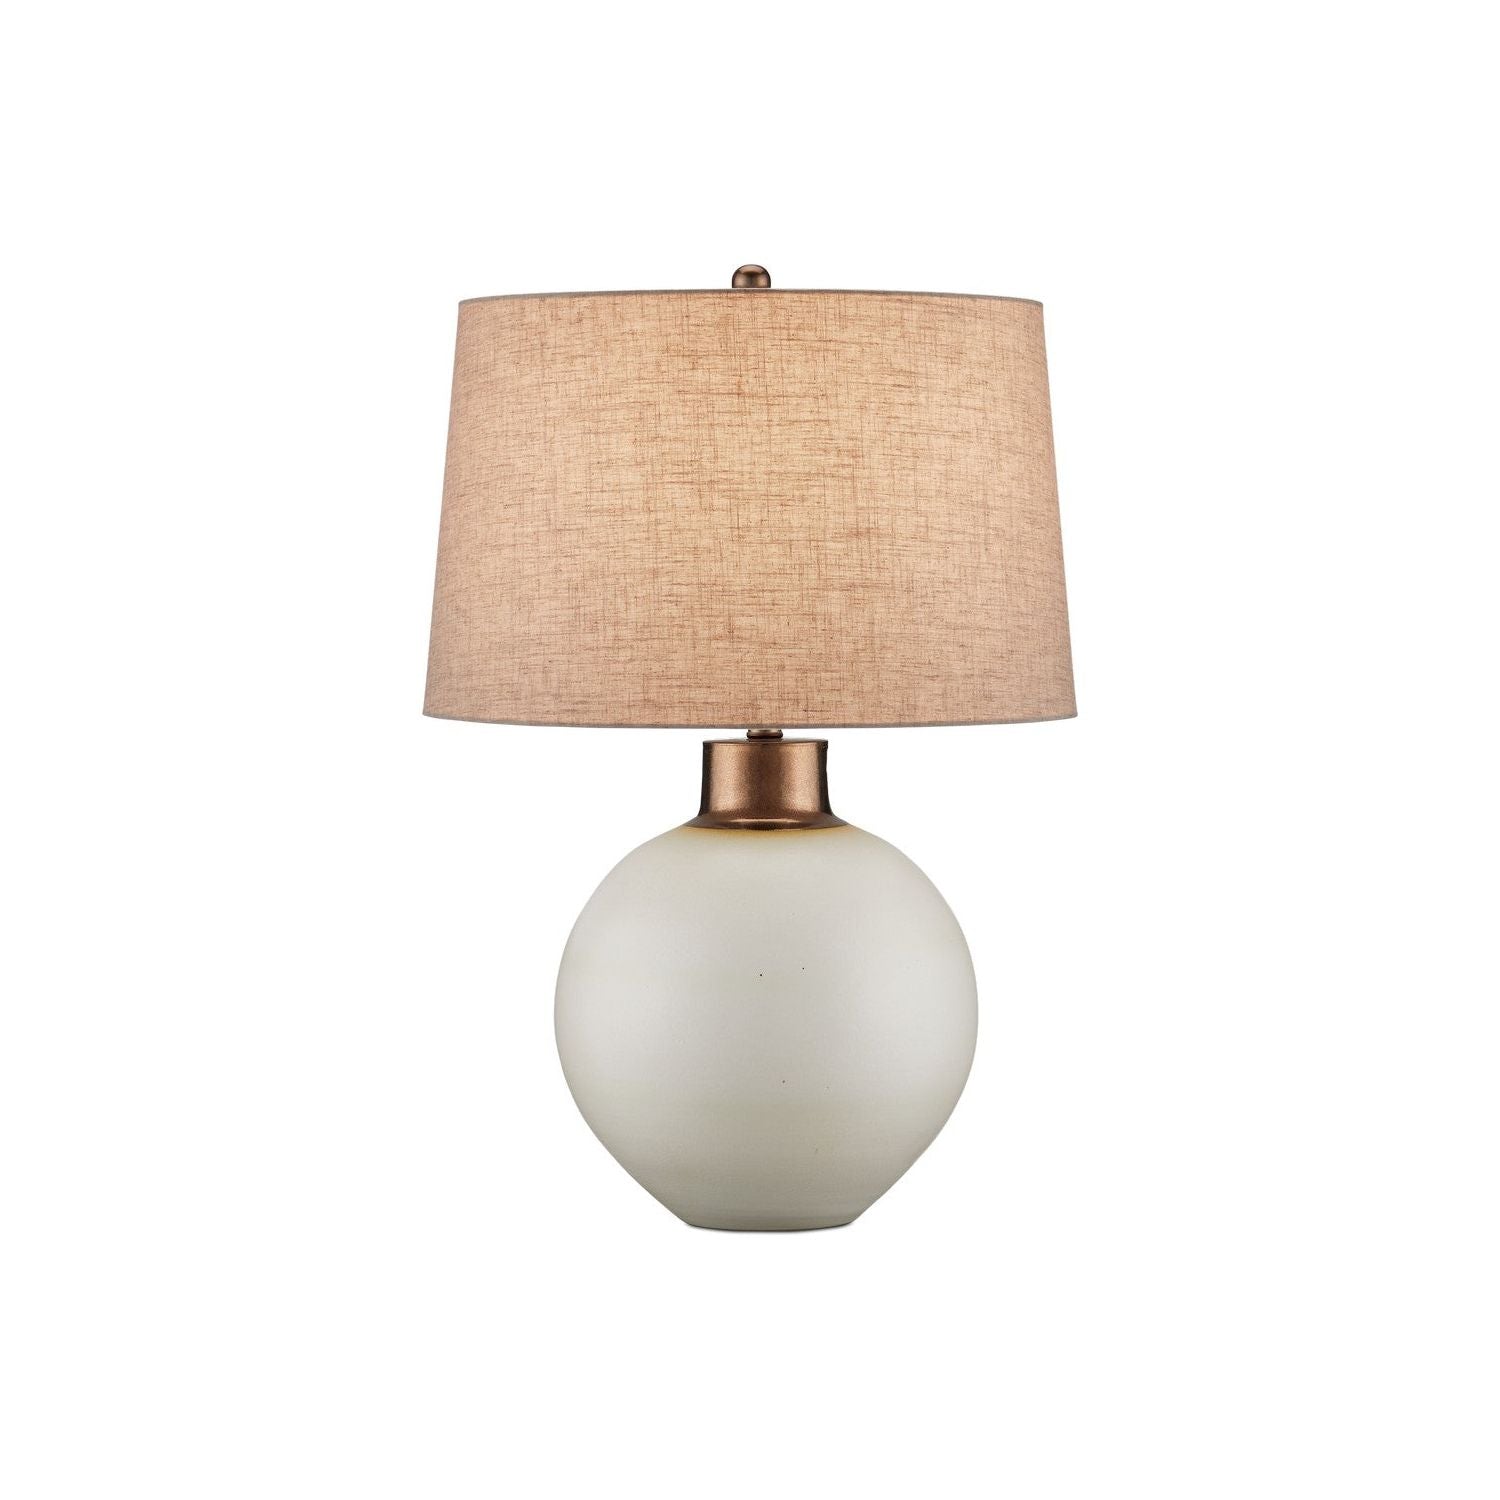 Currey and Company - 6000-0939 - One Light Table Lamp - Off-White/Metallic Gold